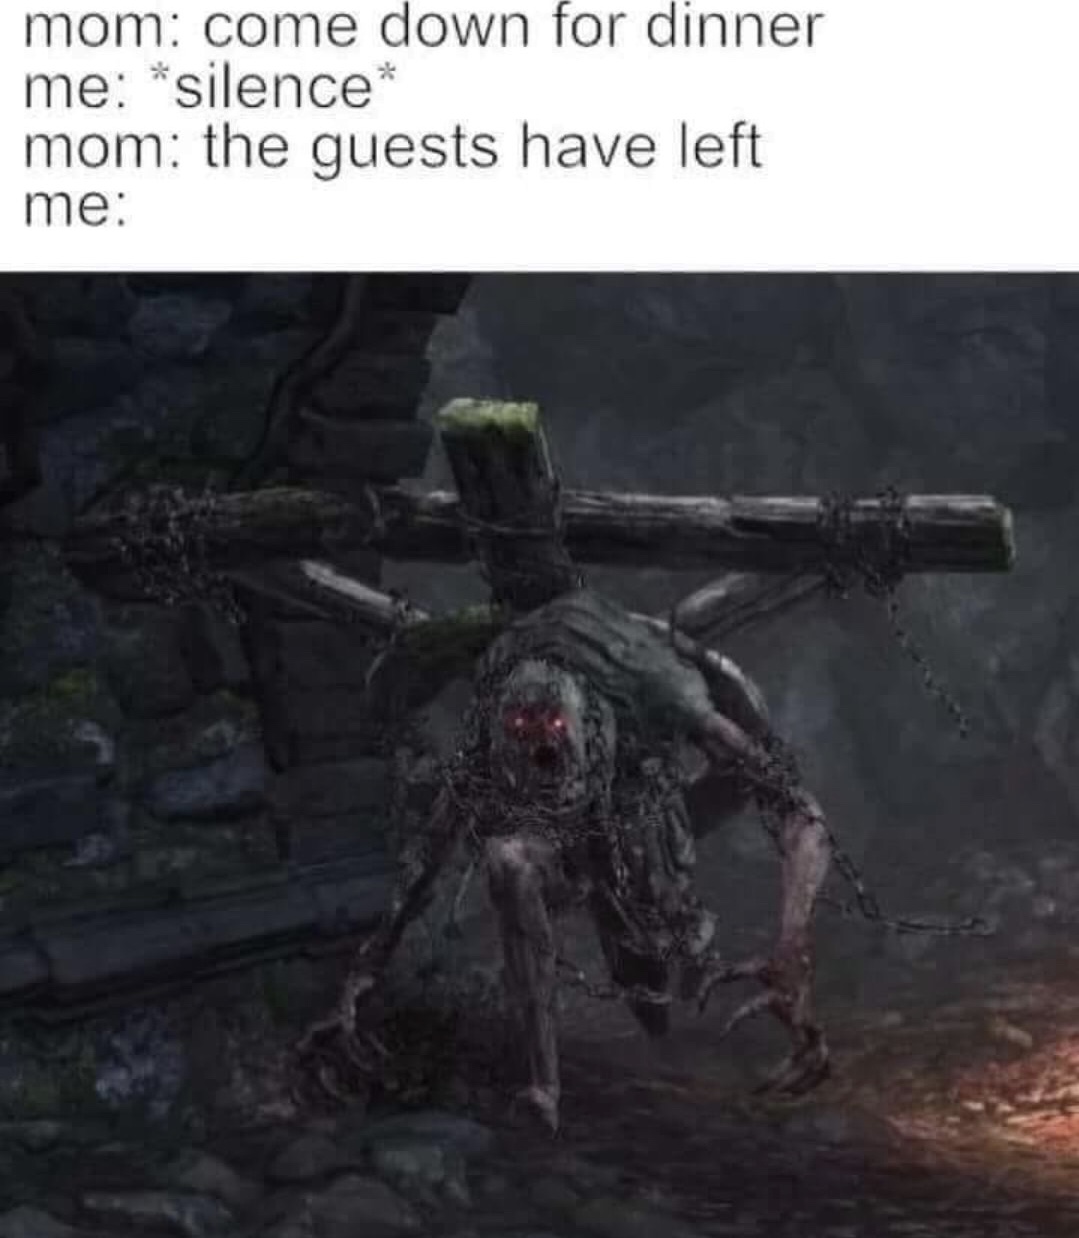 dank memes - guest have left meme - mom come down for dinner me silence mom the guests have left me